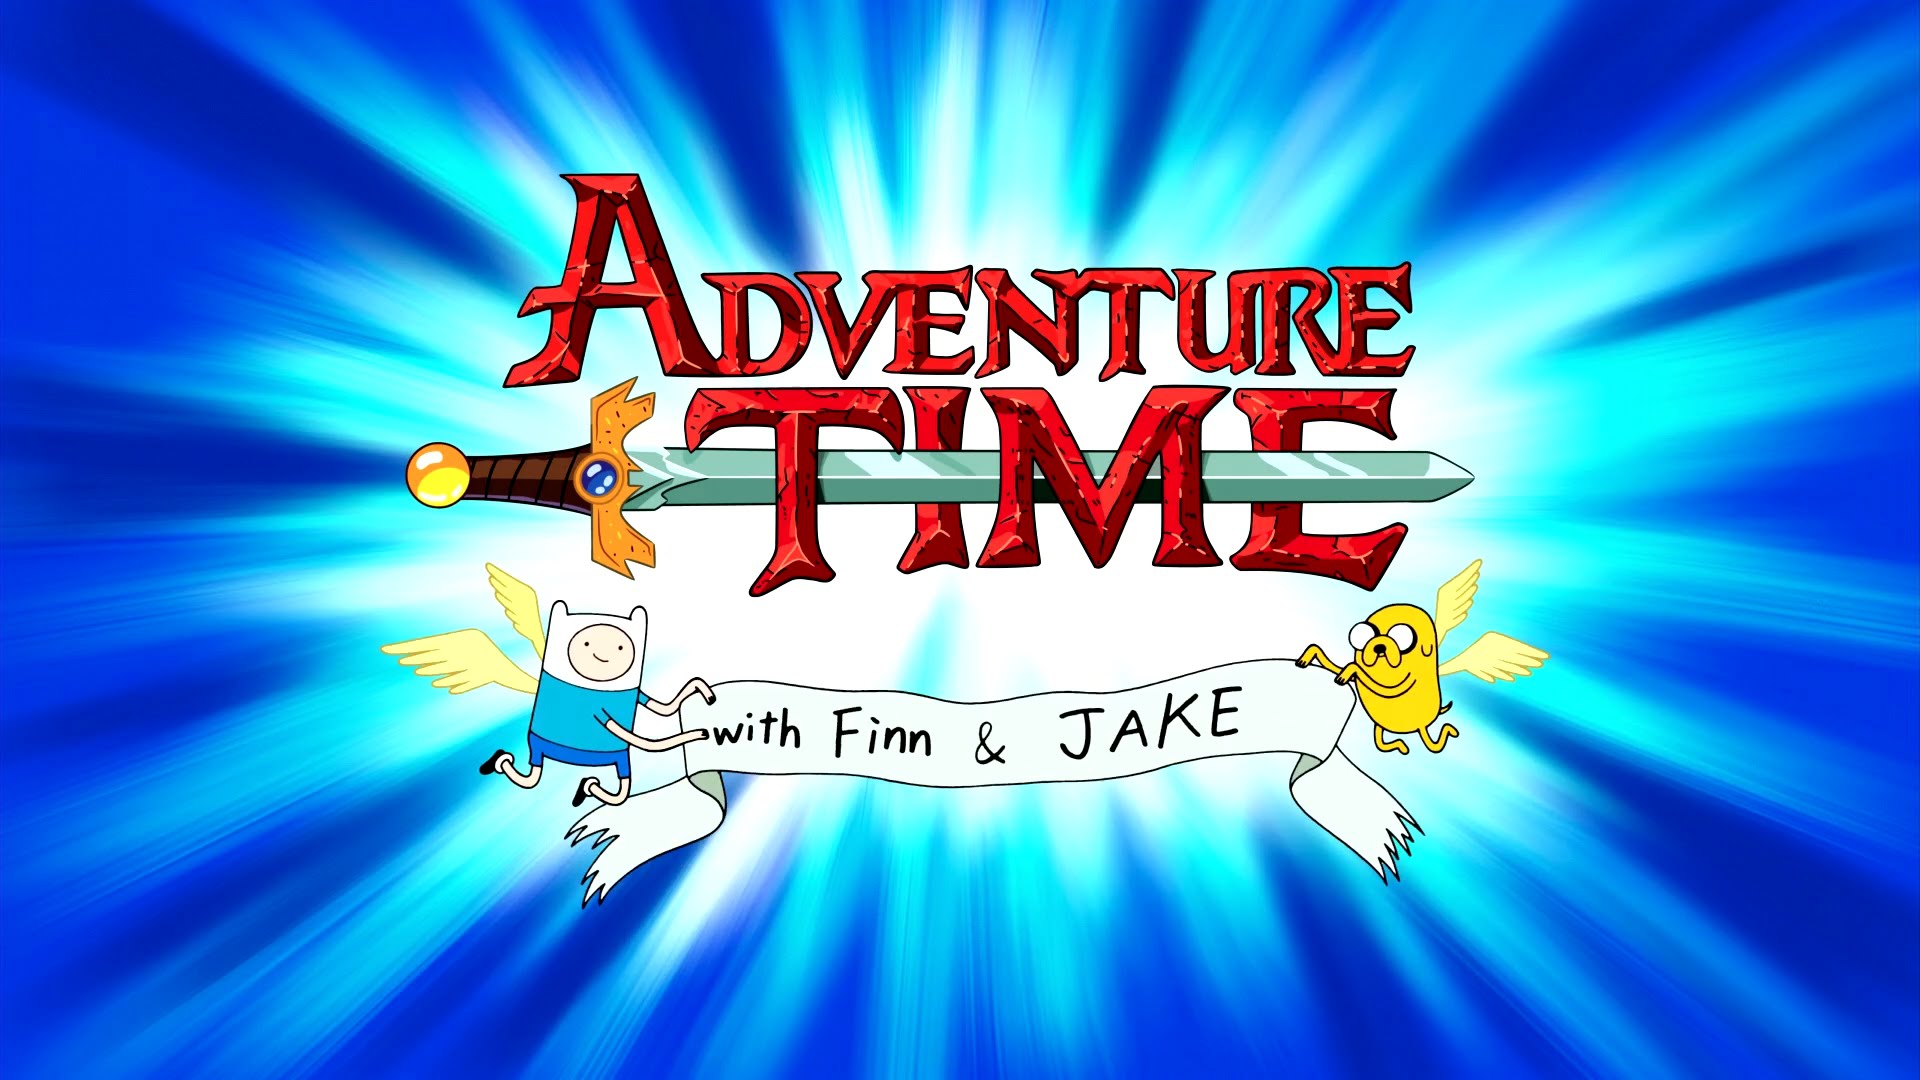 Font of "with Finn & JAKE"